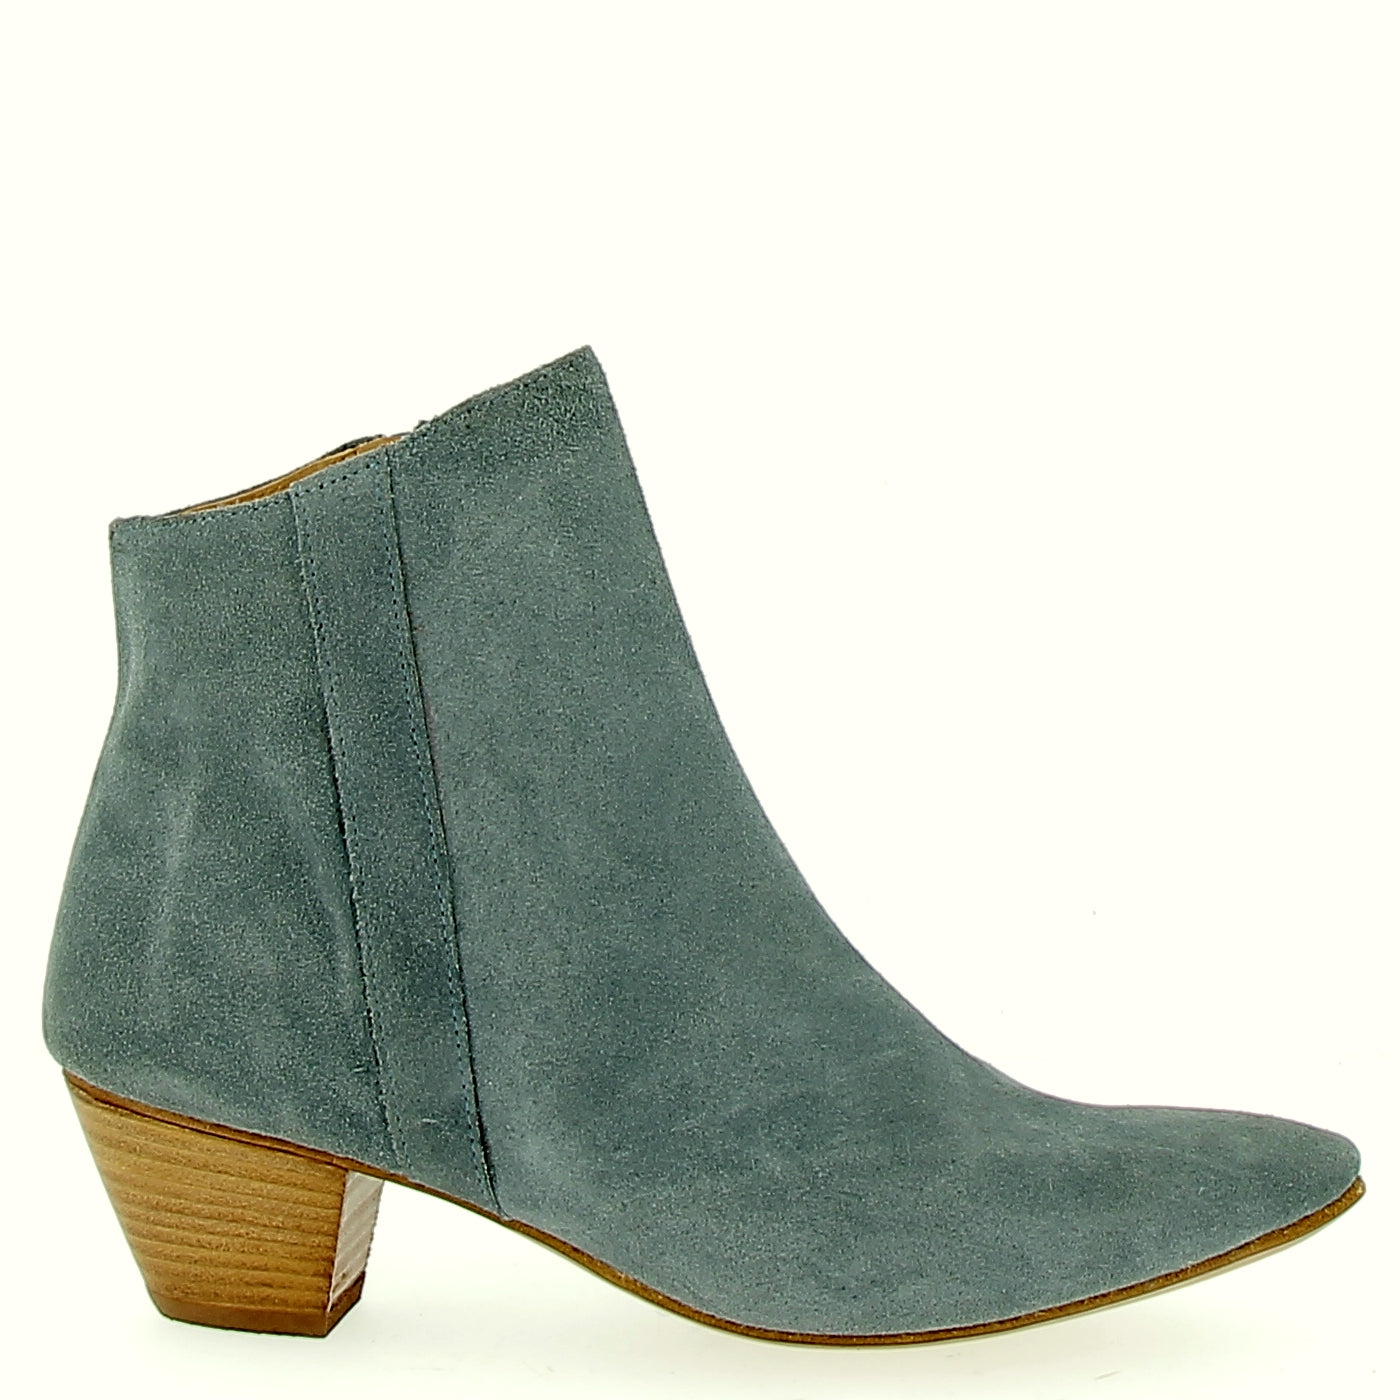 Denim-colored suede ankle boot